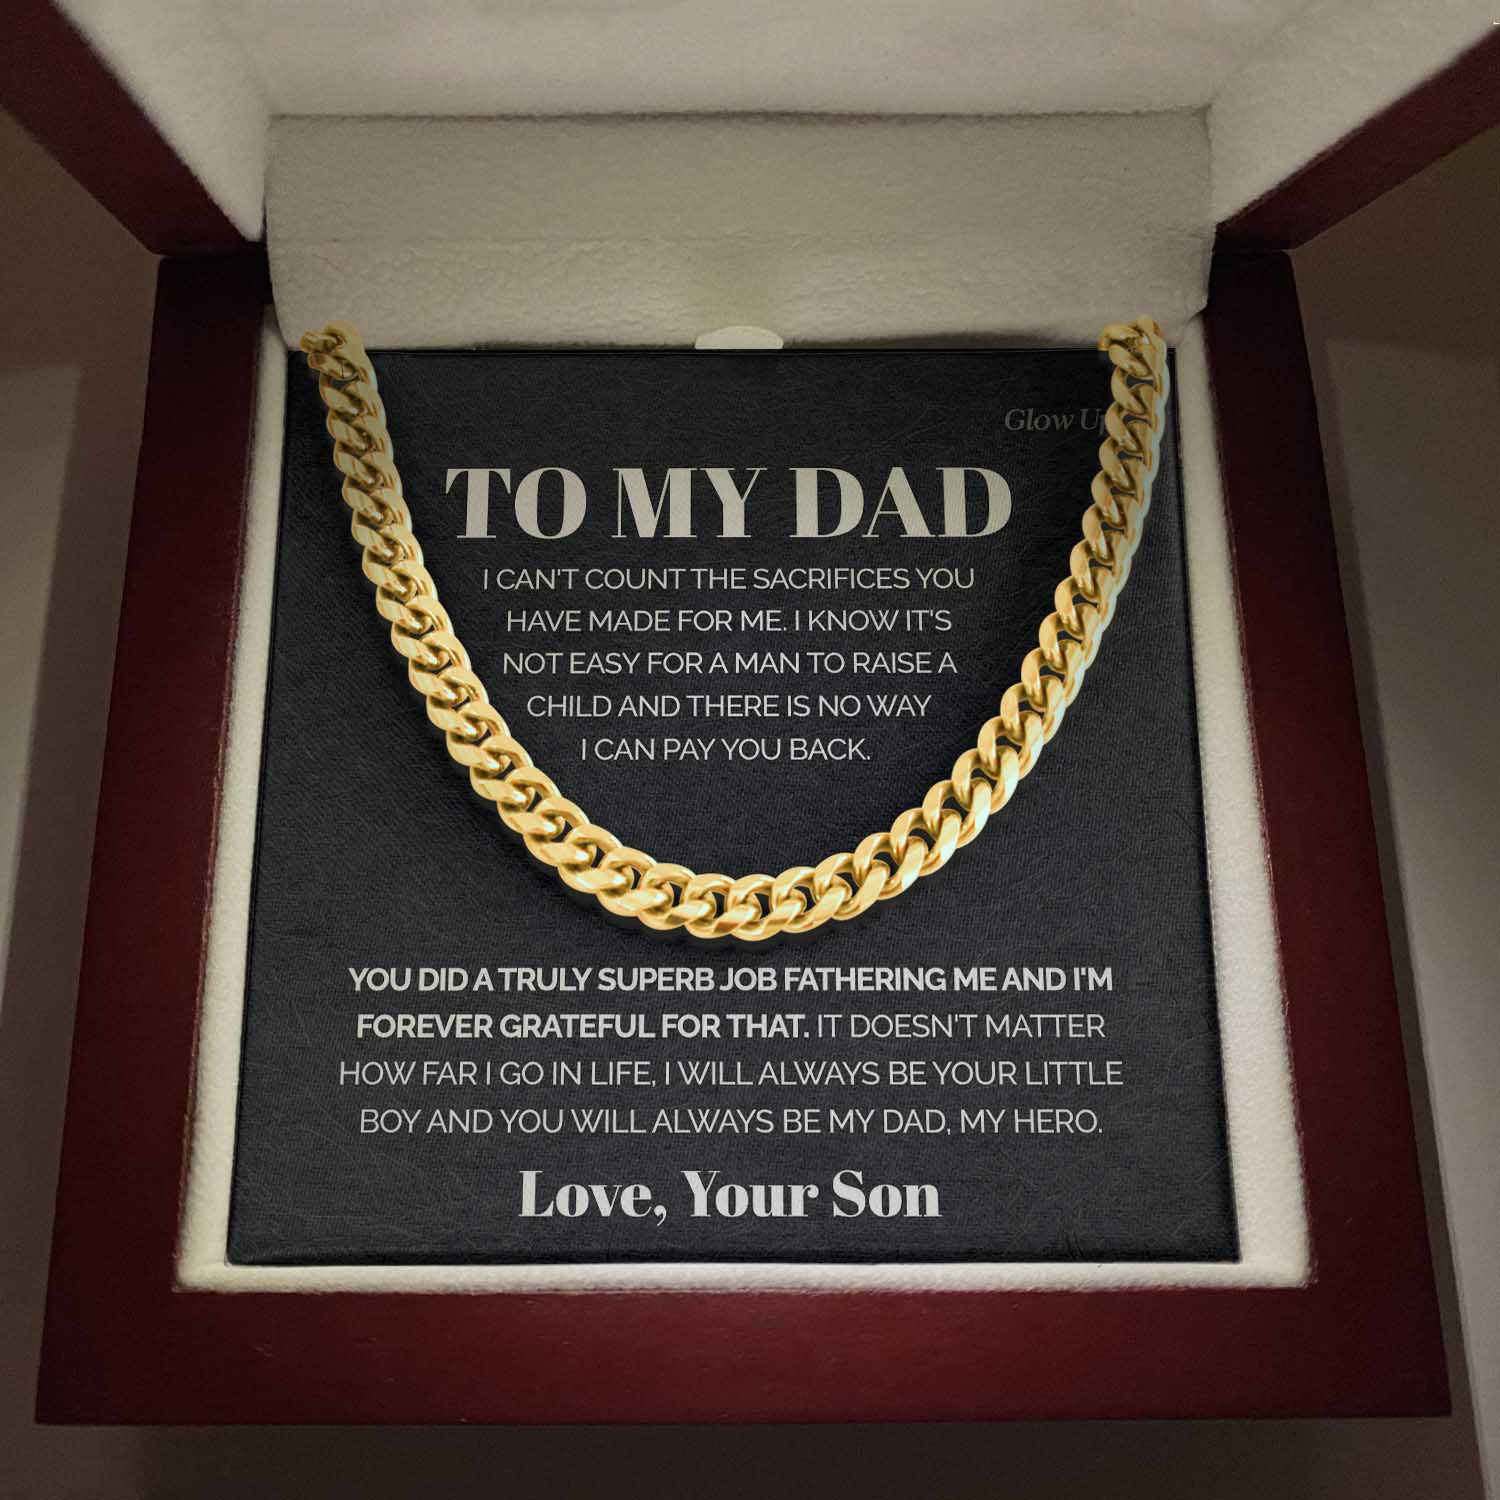 ShineOn Fulfillment Jewelry 14K Yellow Gold Finish / Luxury Box To my Dad from Son - It's not easy for a man to raise a child - Cuban Link Chain